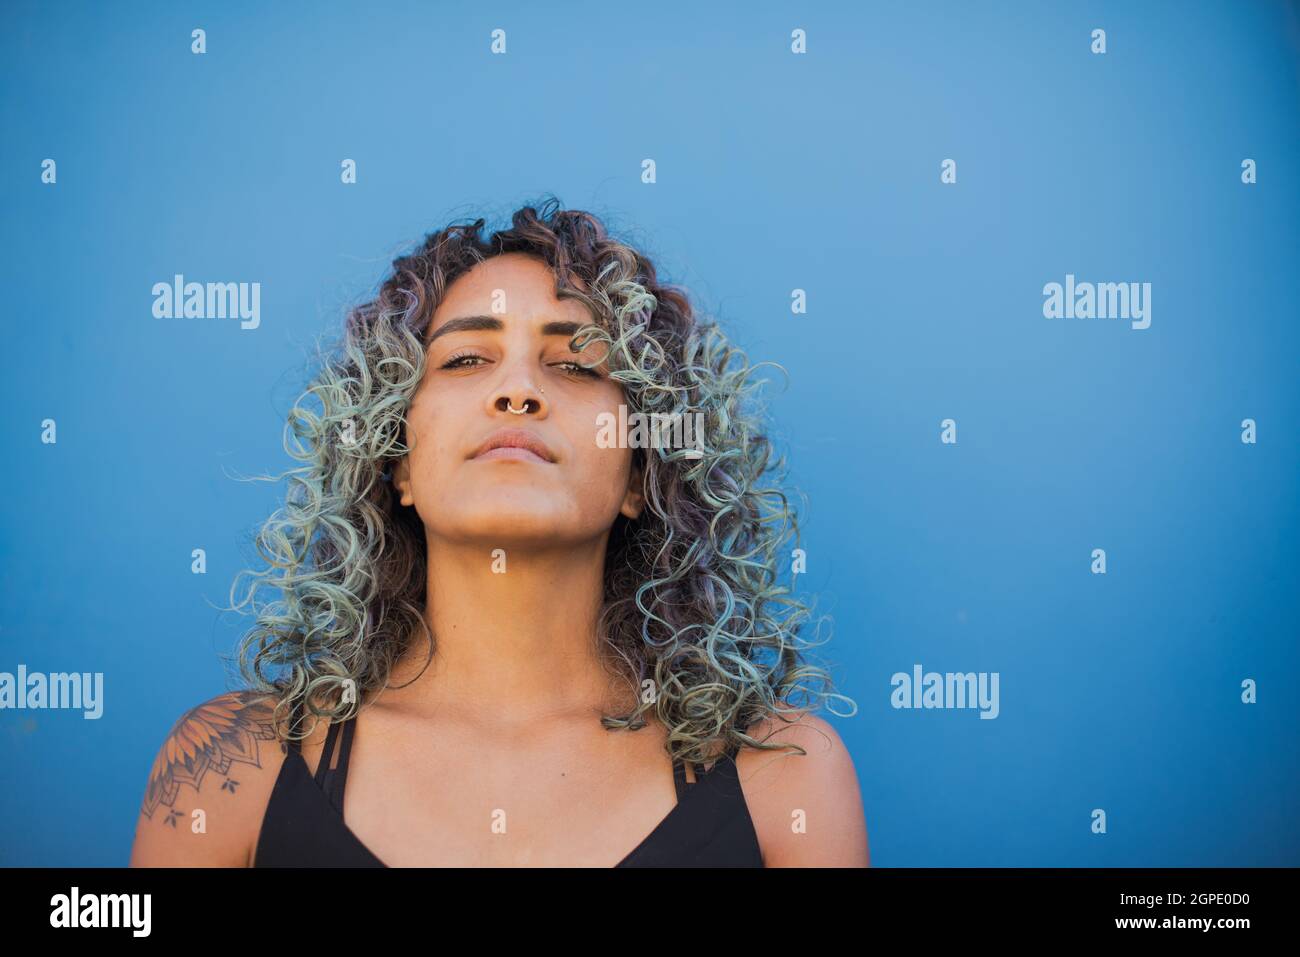 Woman with curly hair shot against blue background Stock Photo